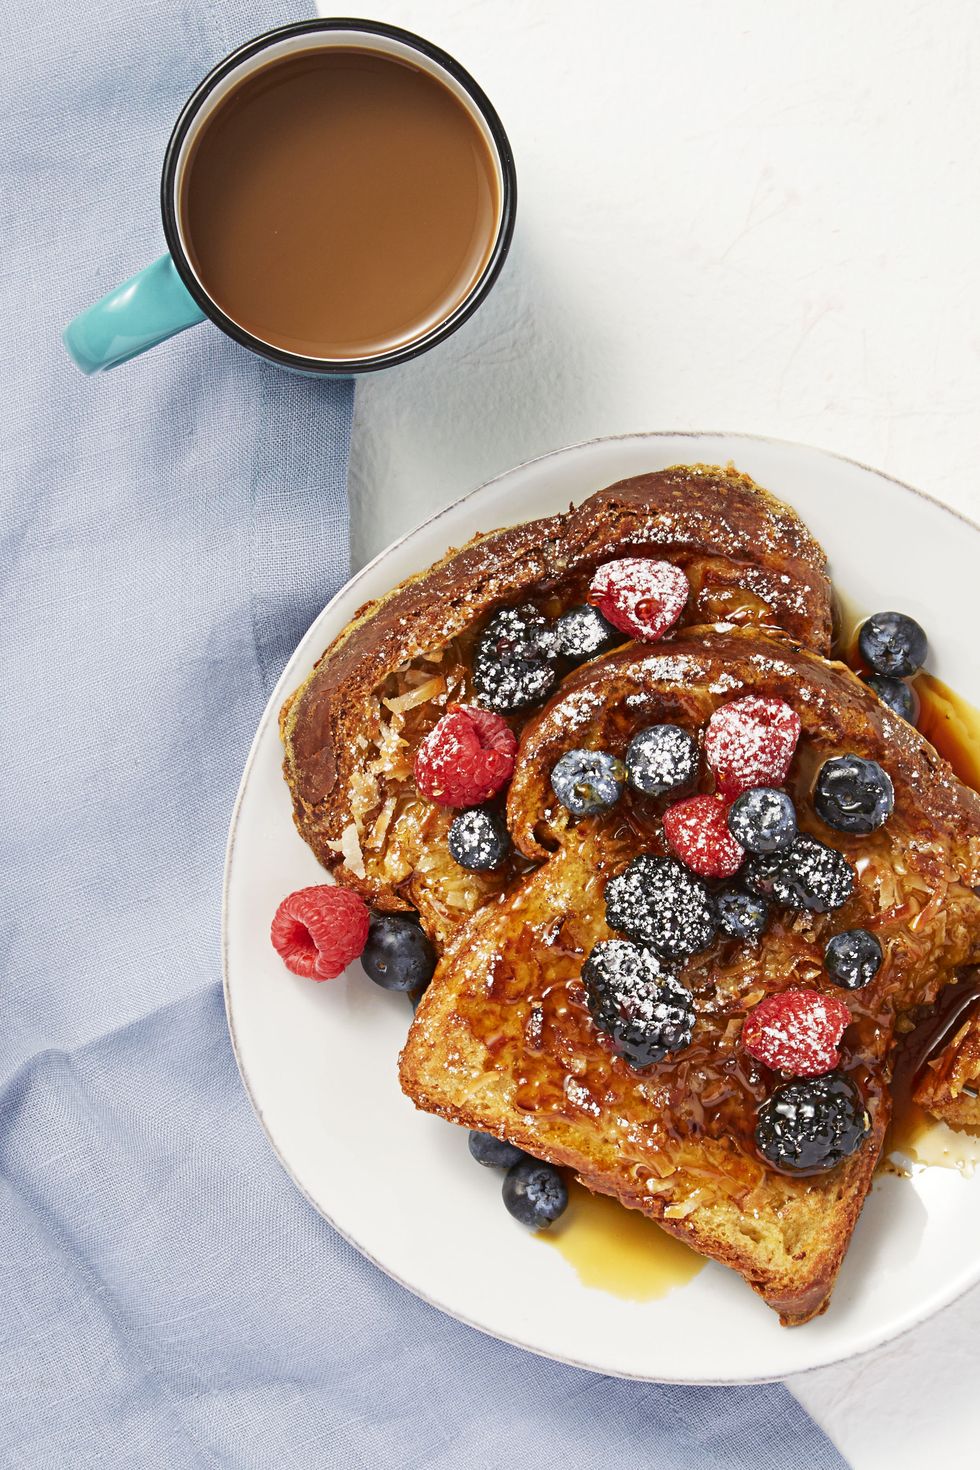 Coconut French Toast